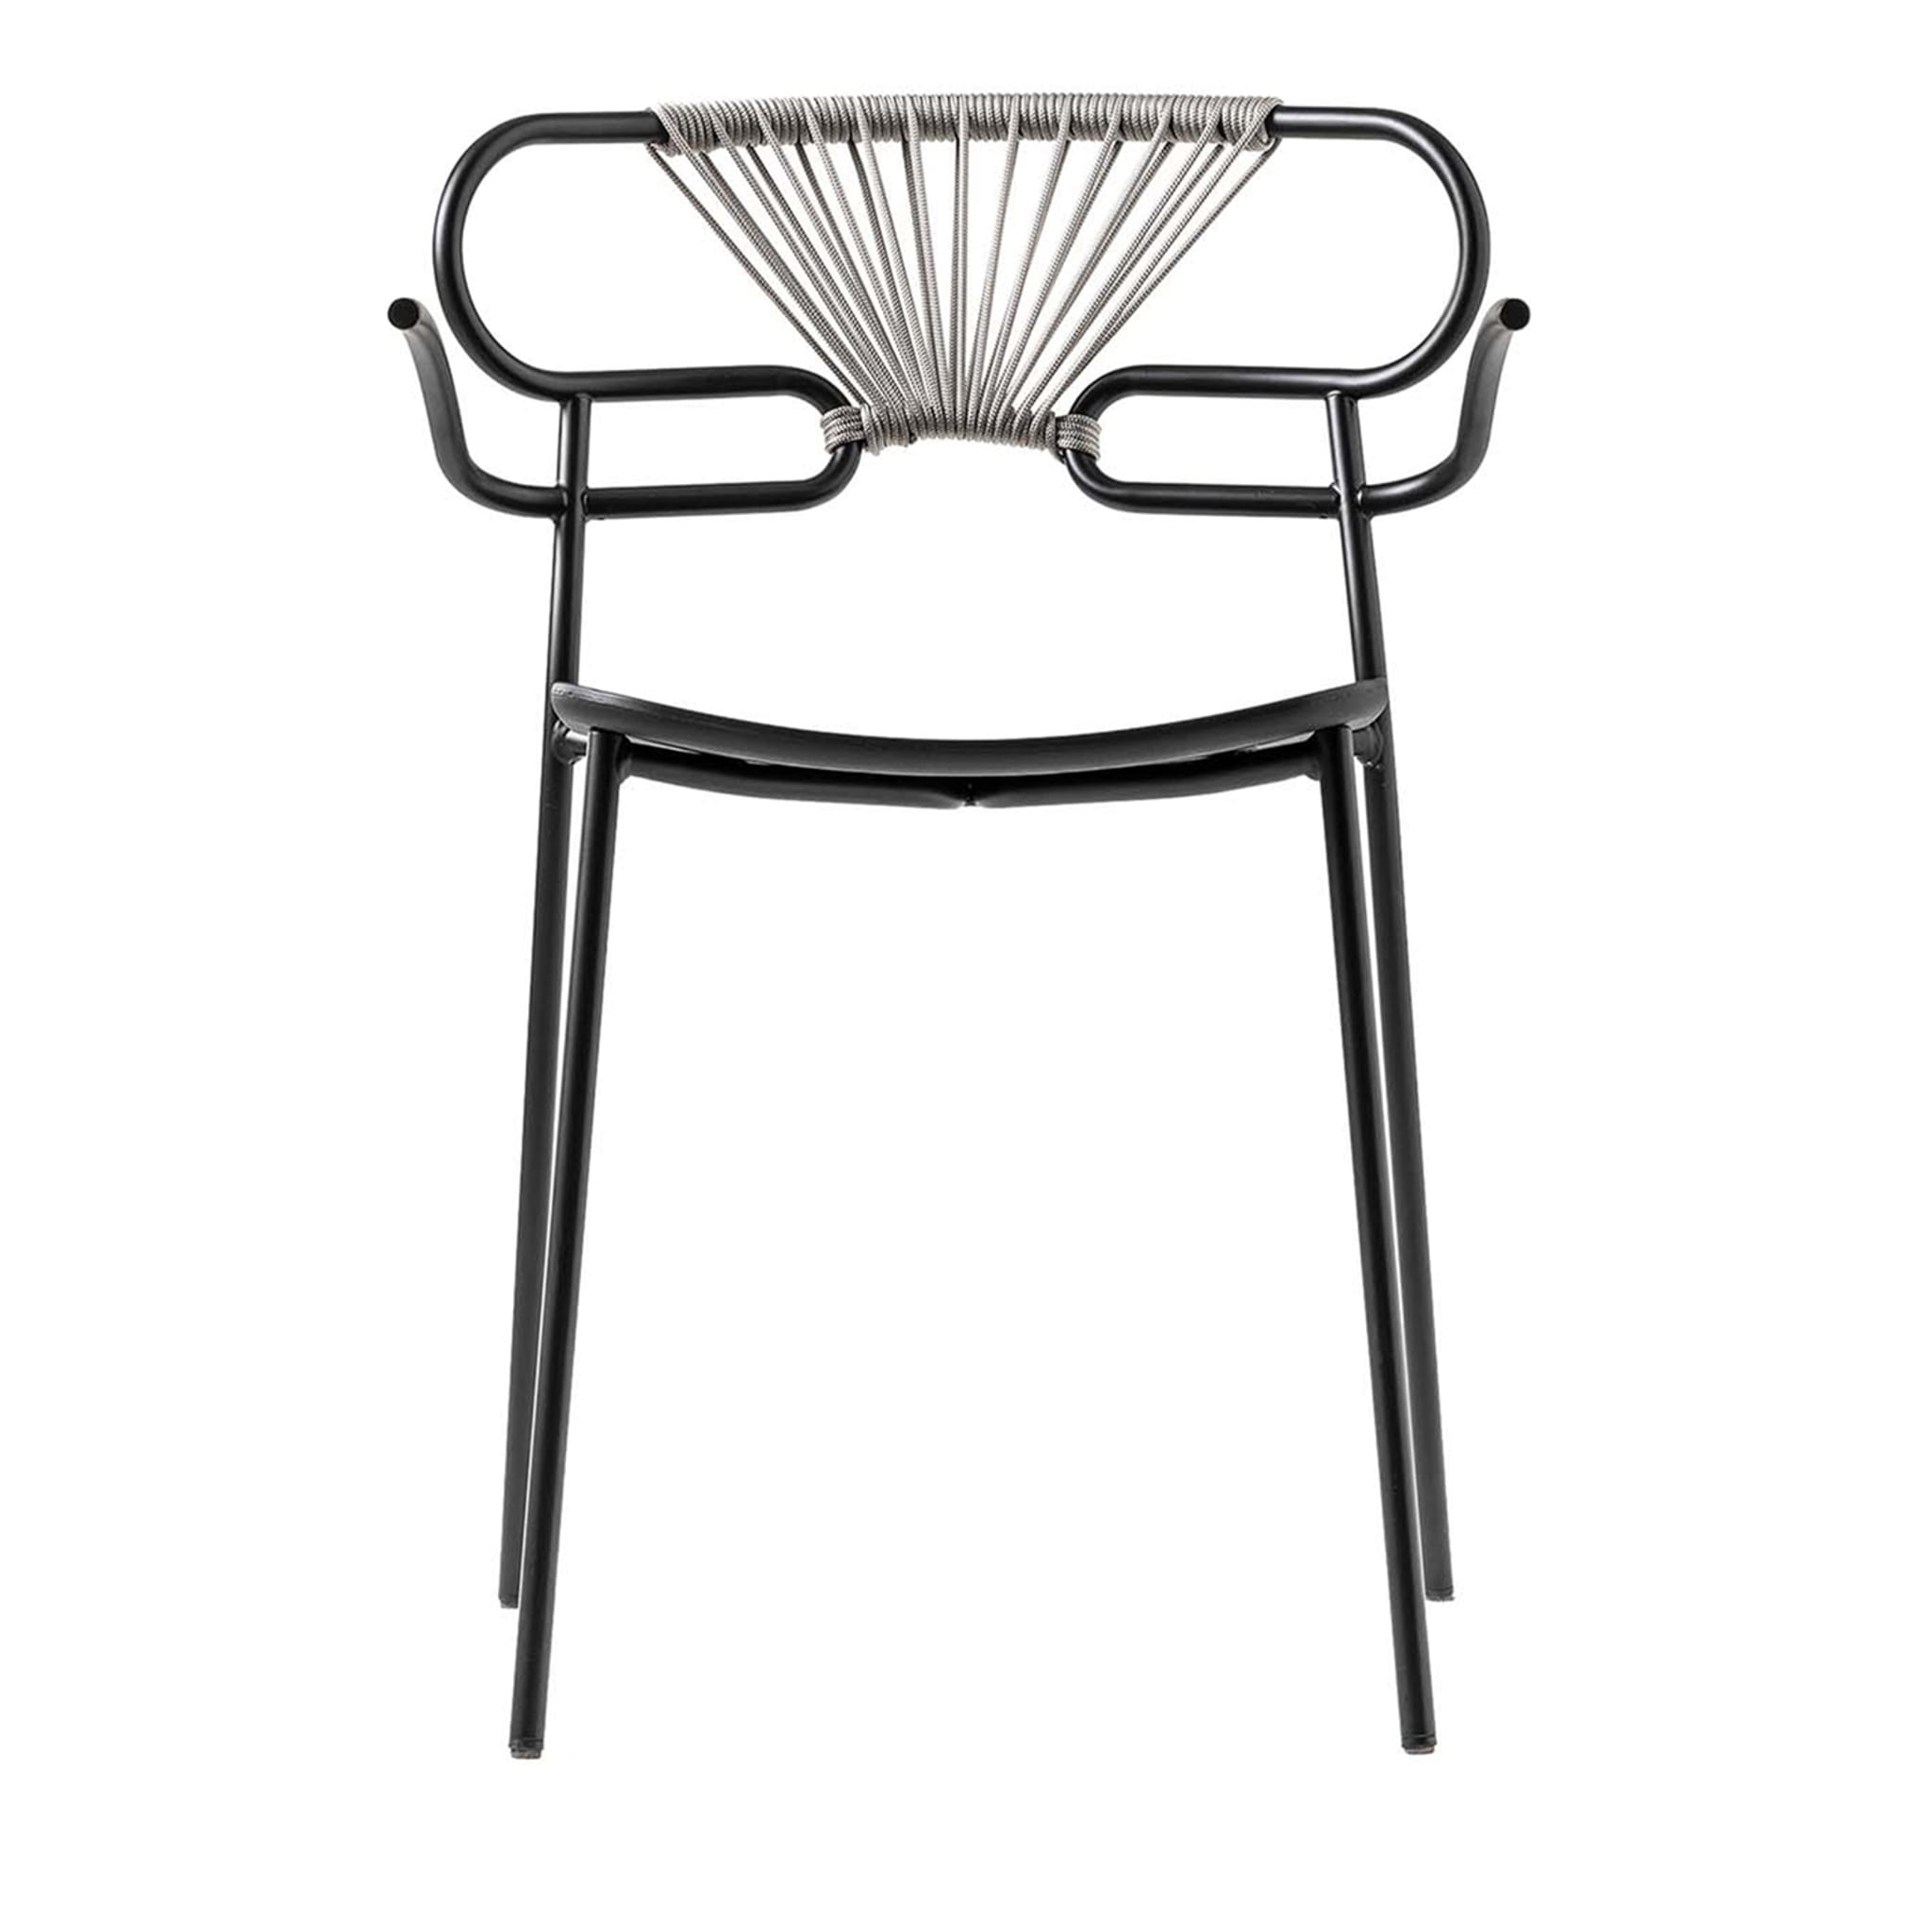 Genoa Chair with Gray Rope #1 by Cesare Ehr - Main view